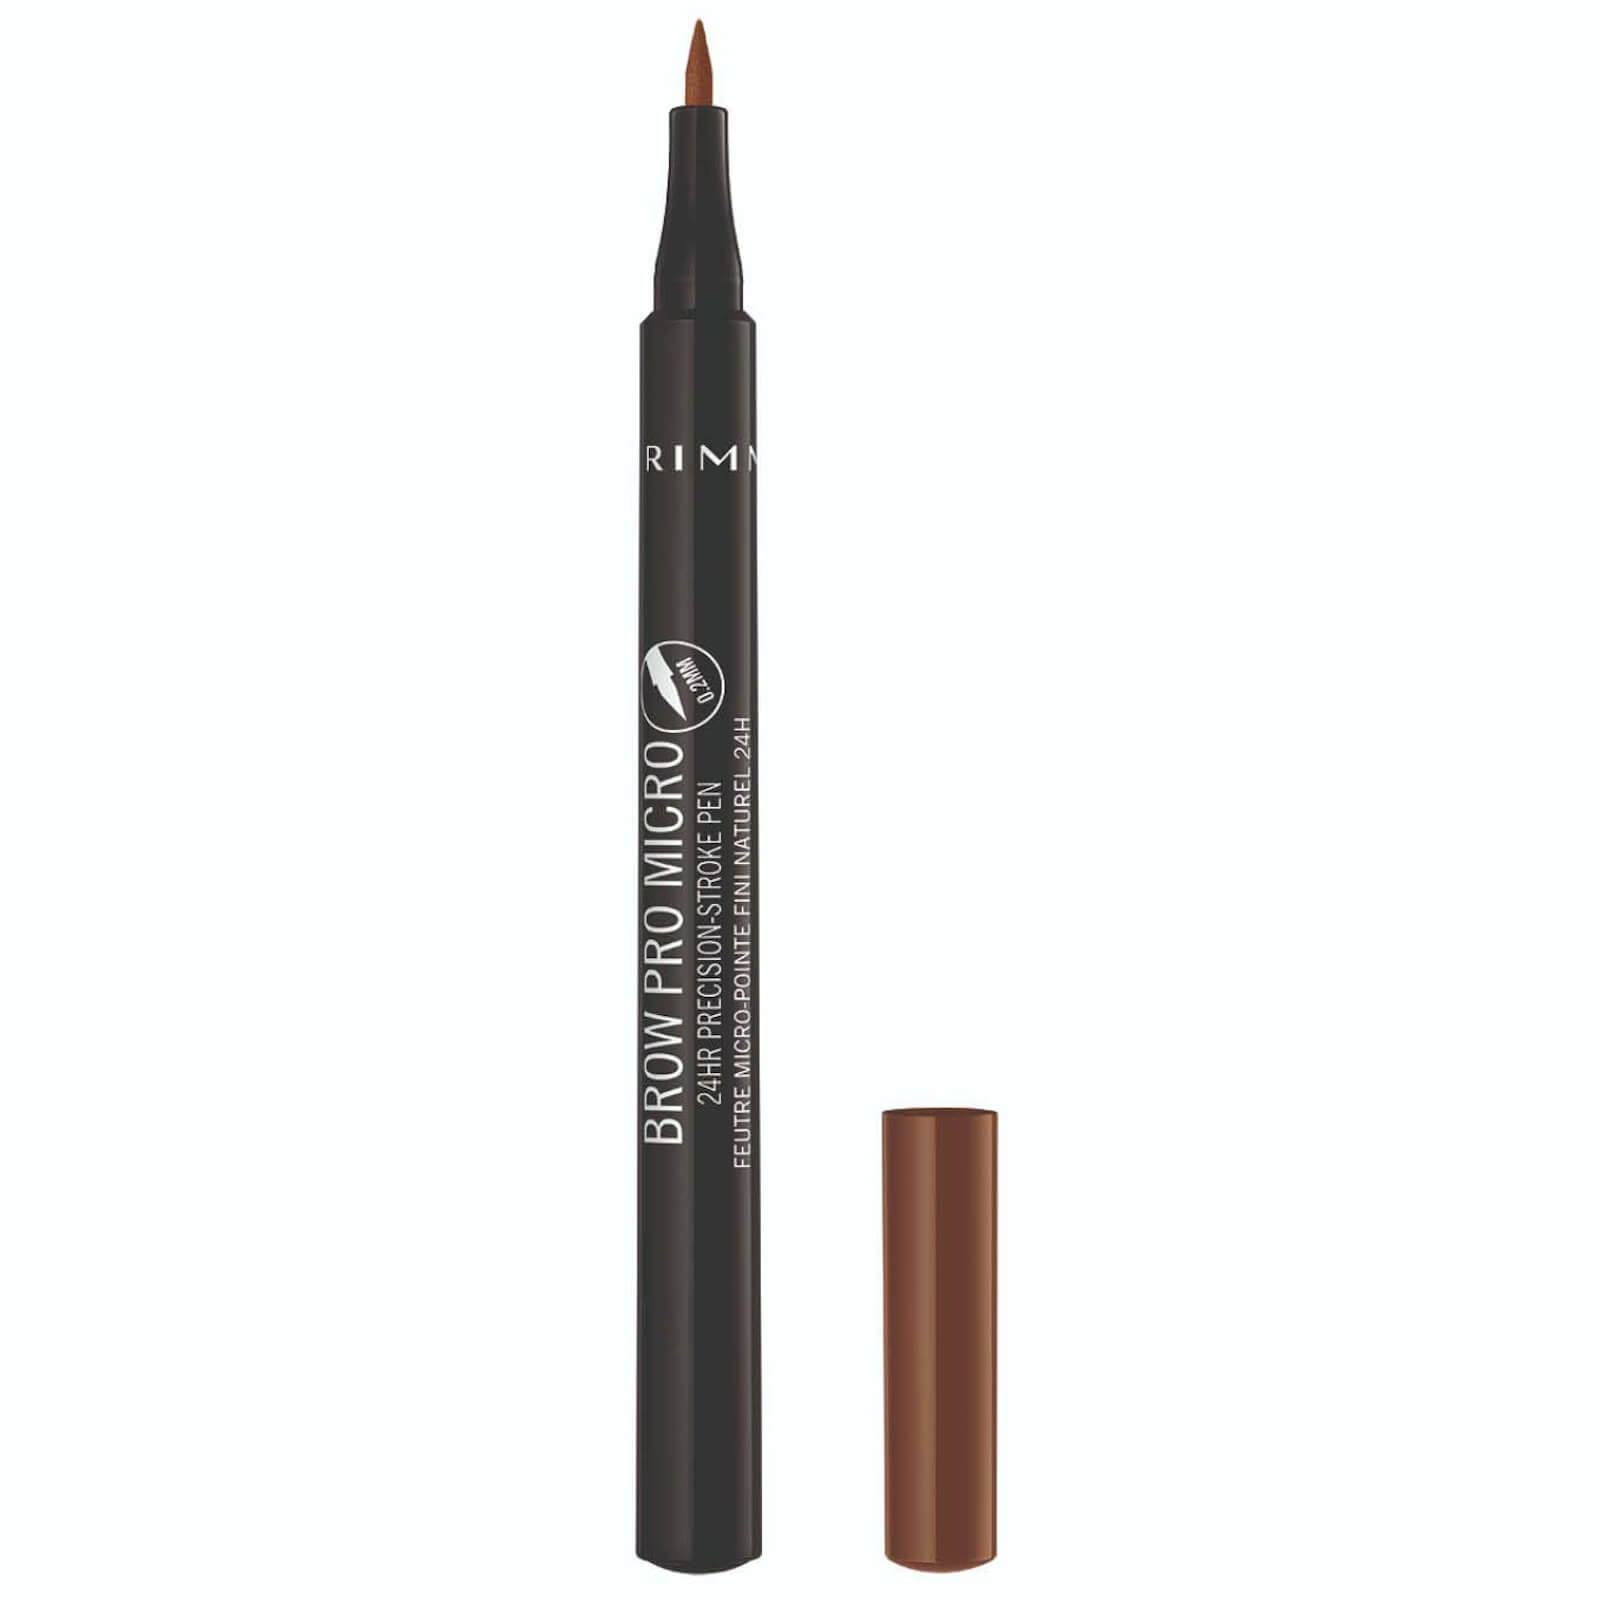 Image of Rimmel Brow Pro Micro 24HR Precision-Stroke Pen 1ml (Various Shades) - 002 Honey Brown